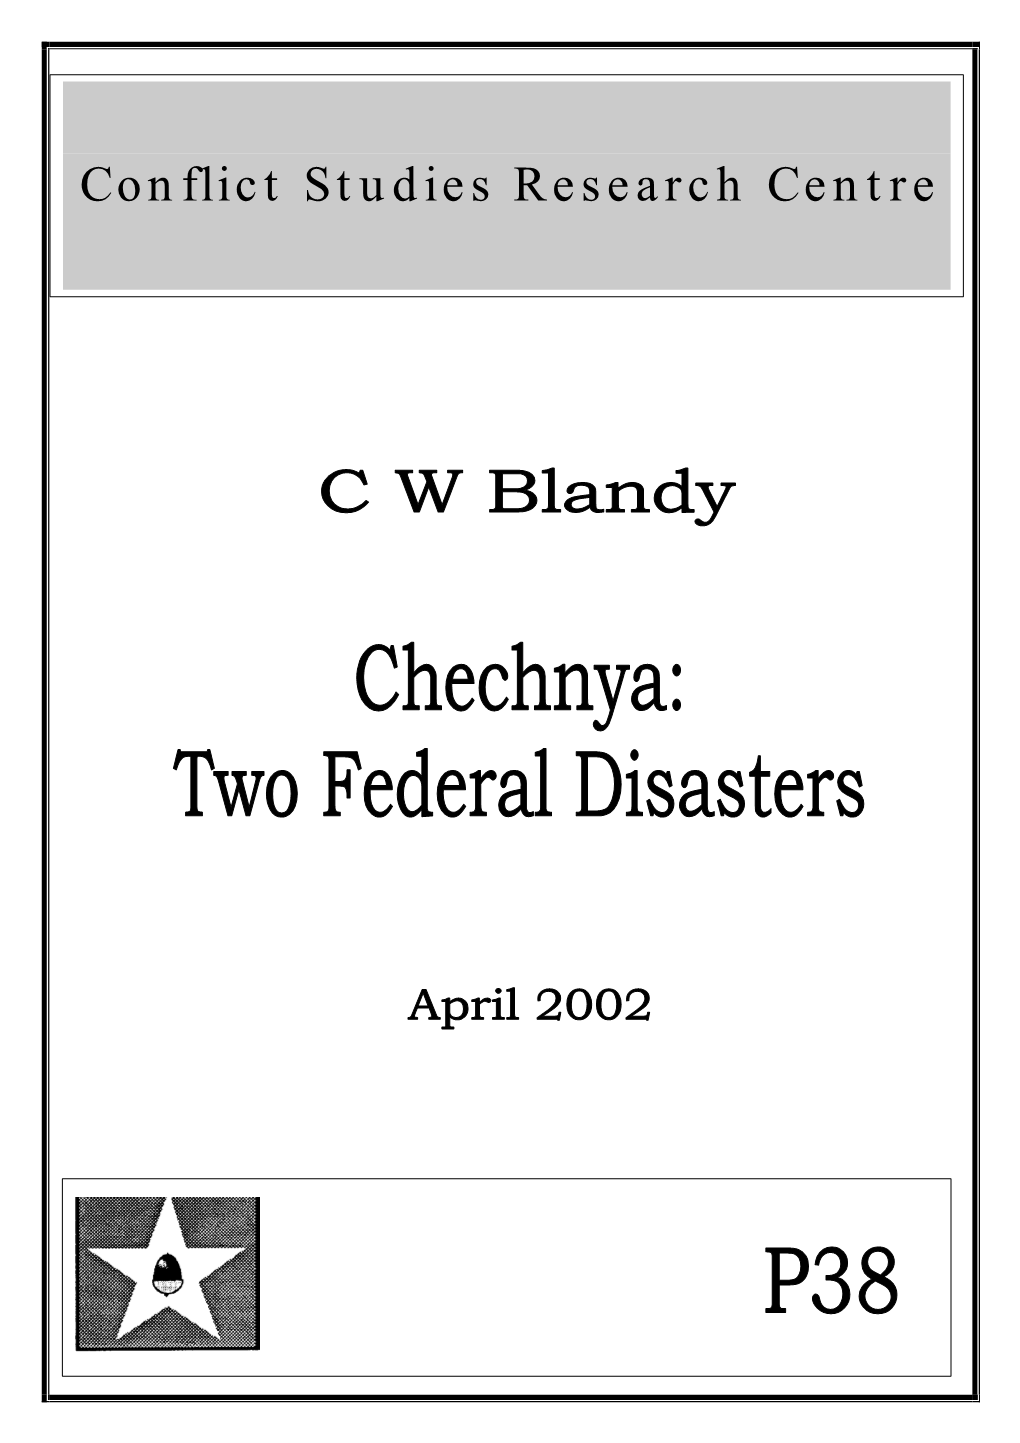 Chechnya: Two Federal Disasters